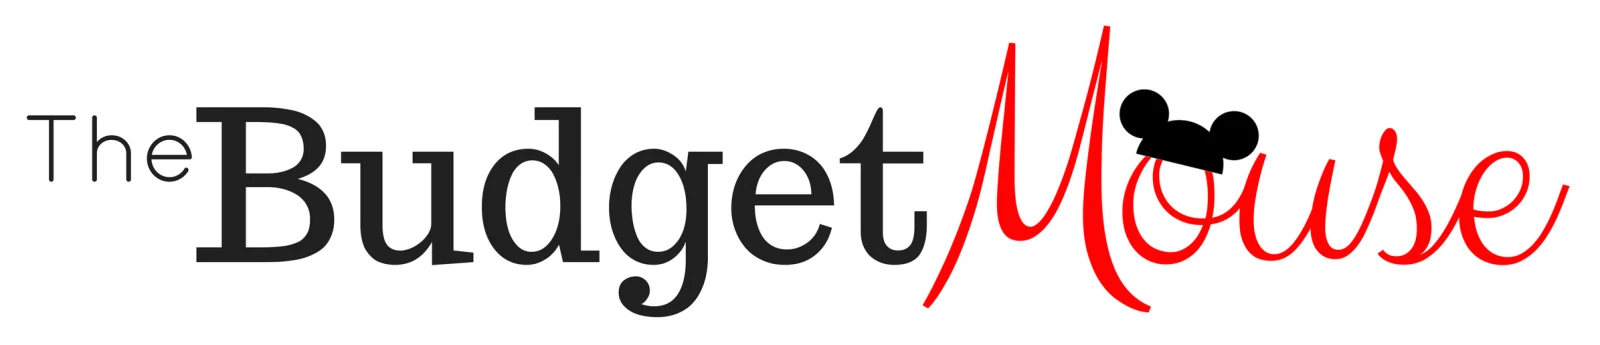 the budget mouse logo